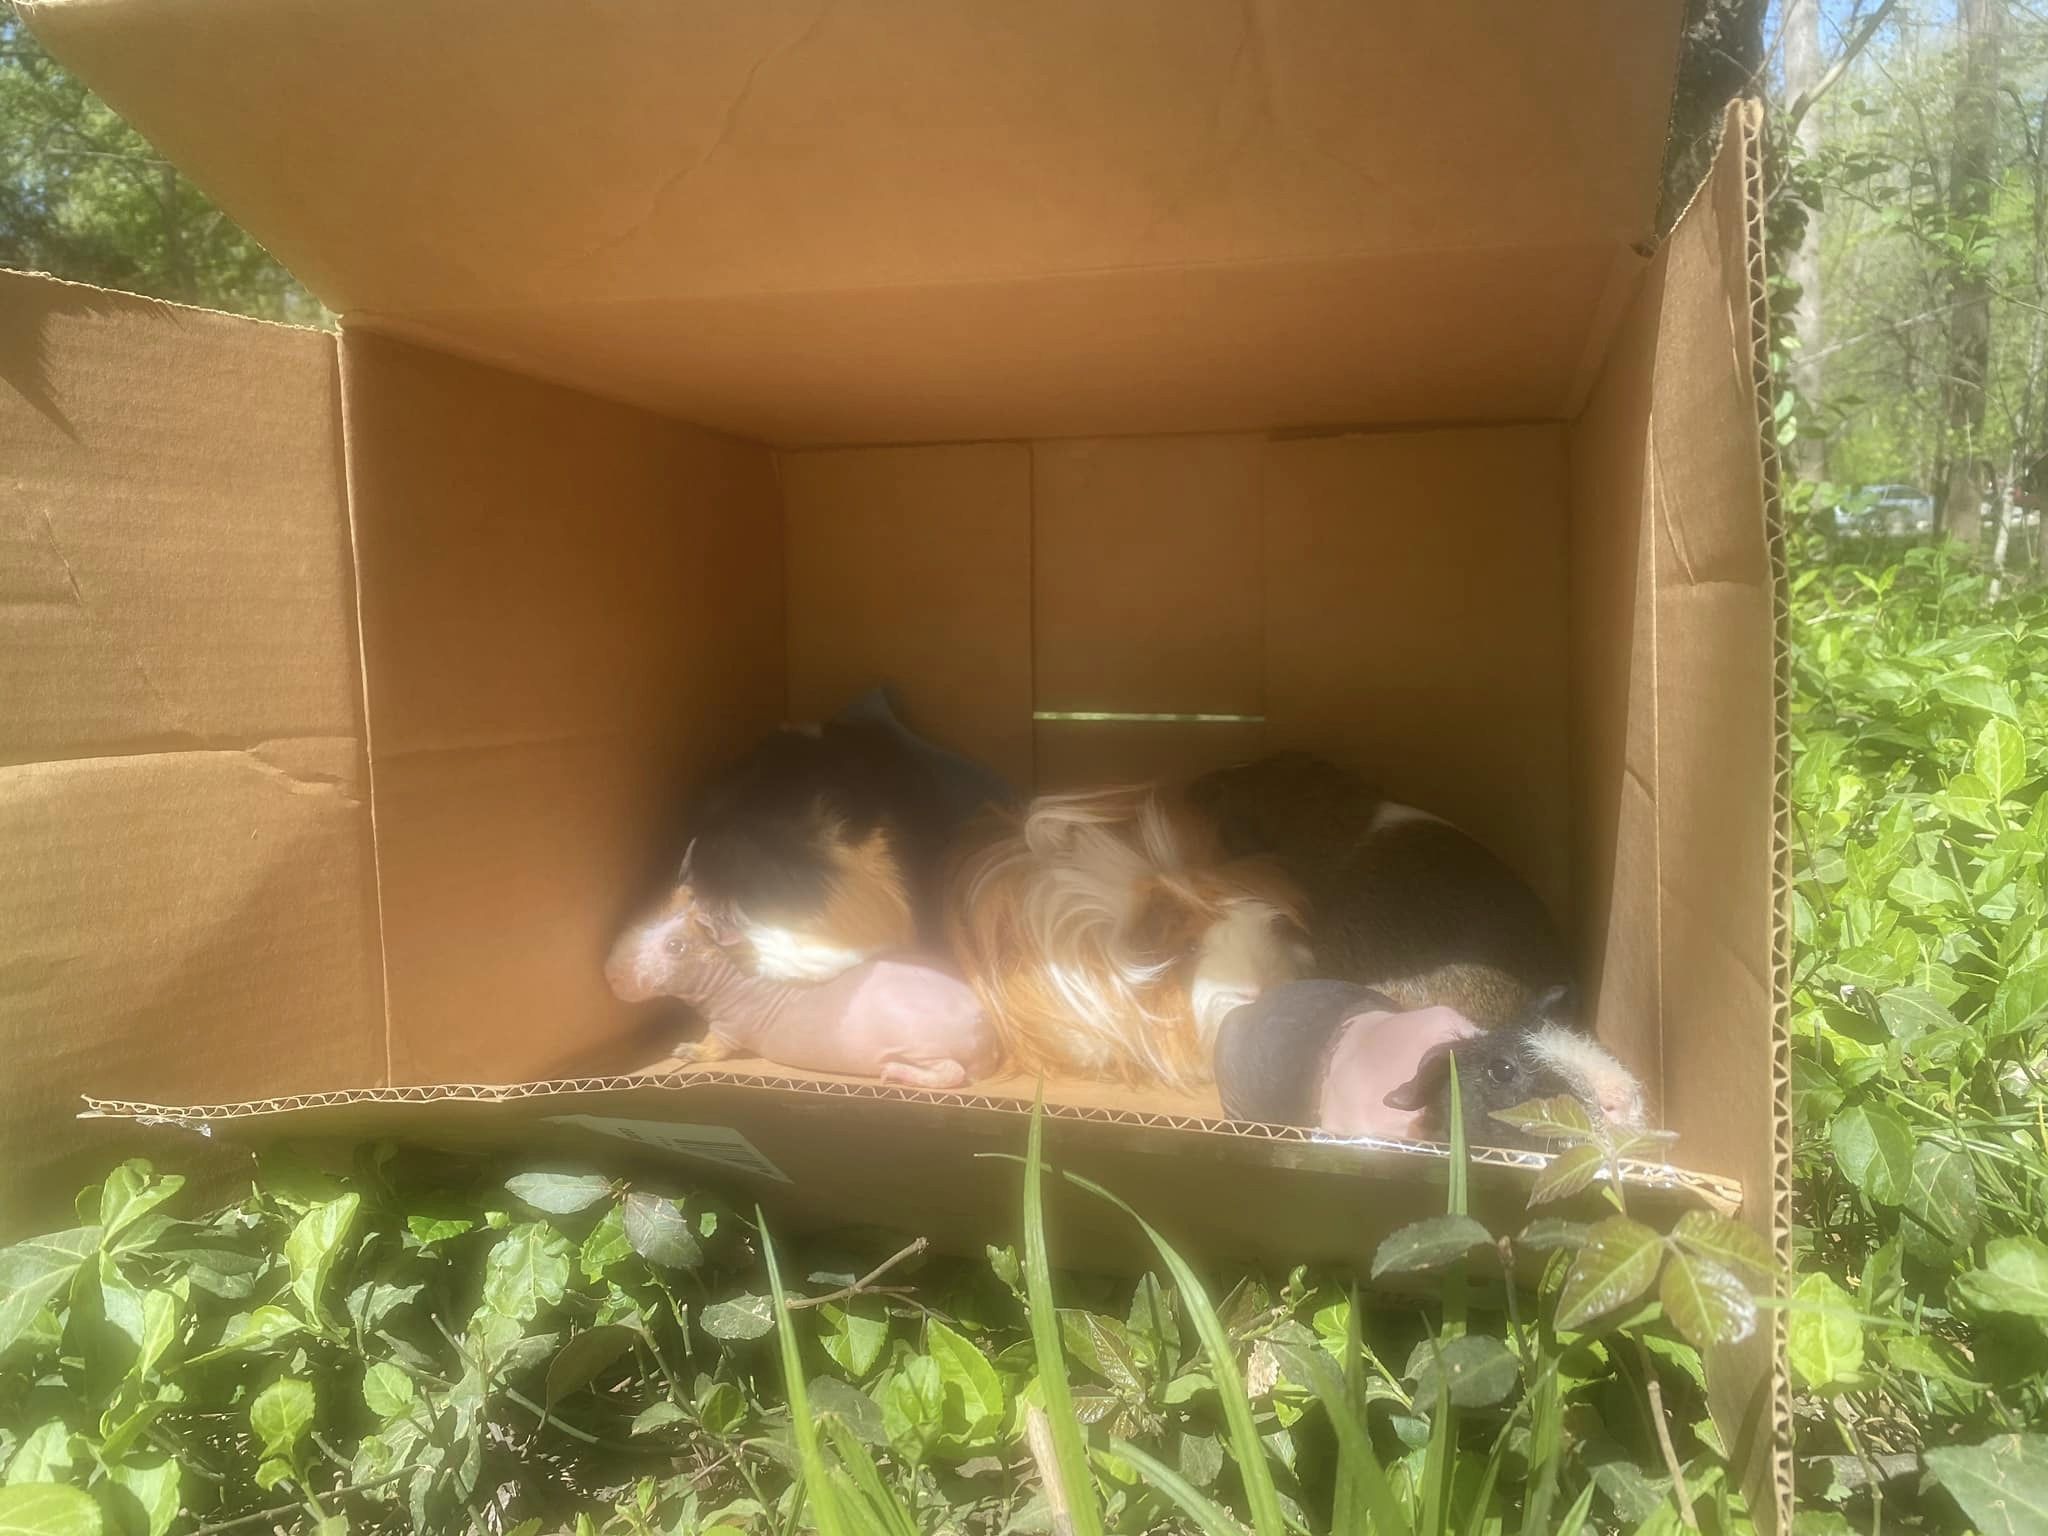 cardboard box with animals in it